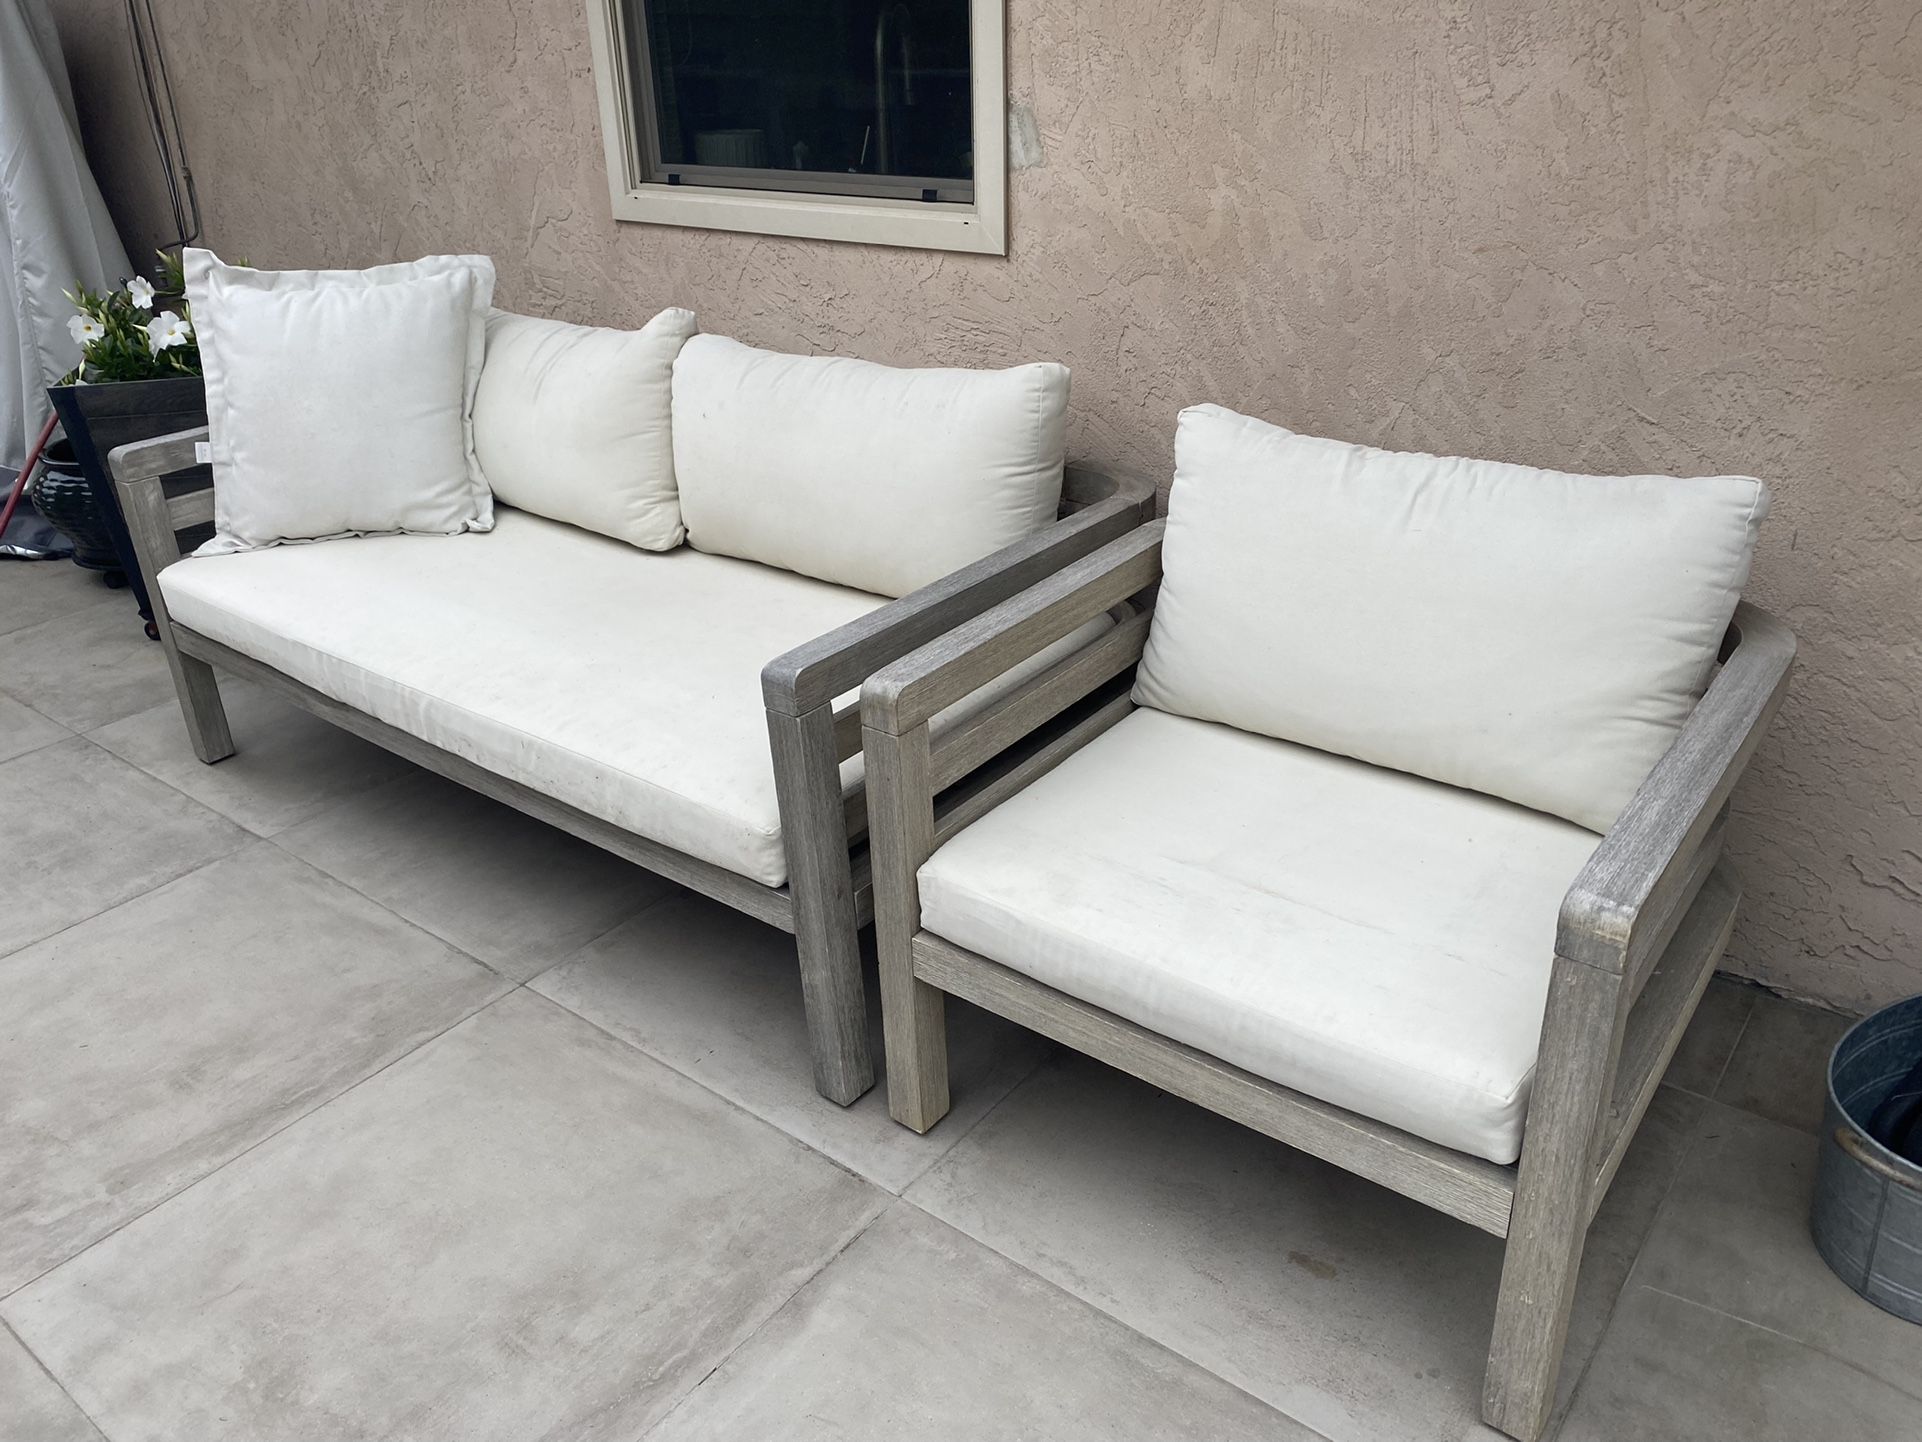 Patio Furniture, From Pier1